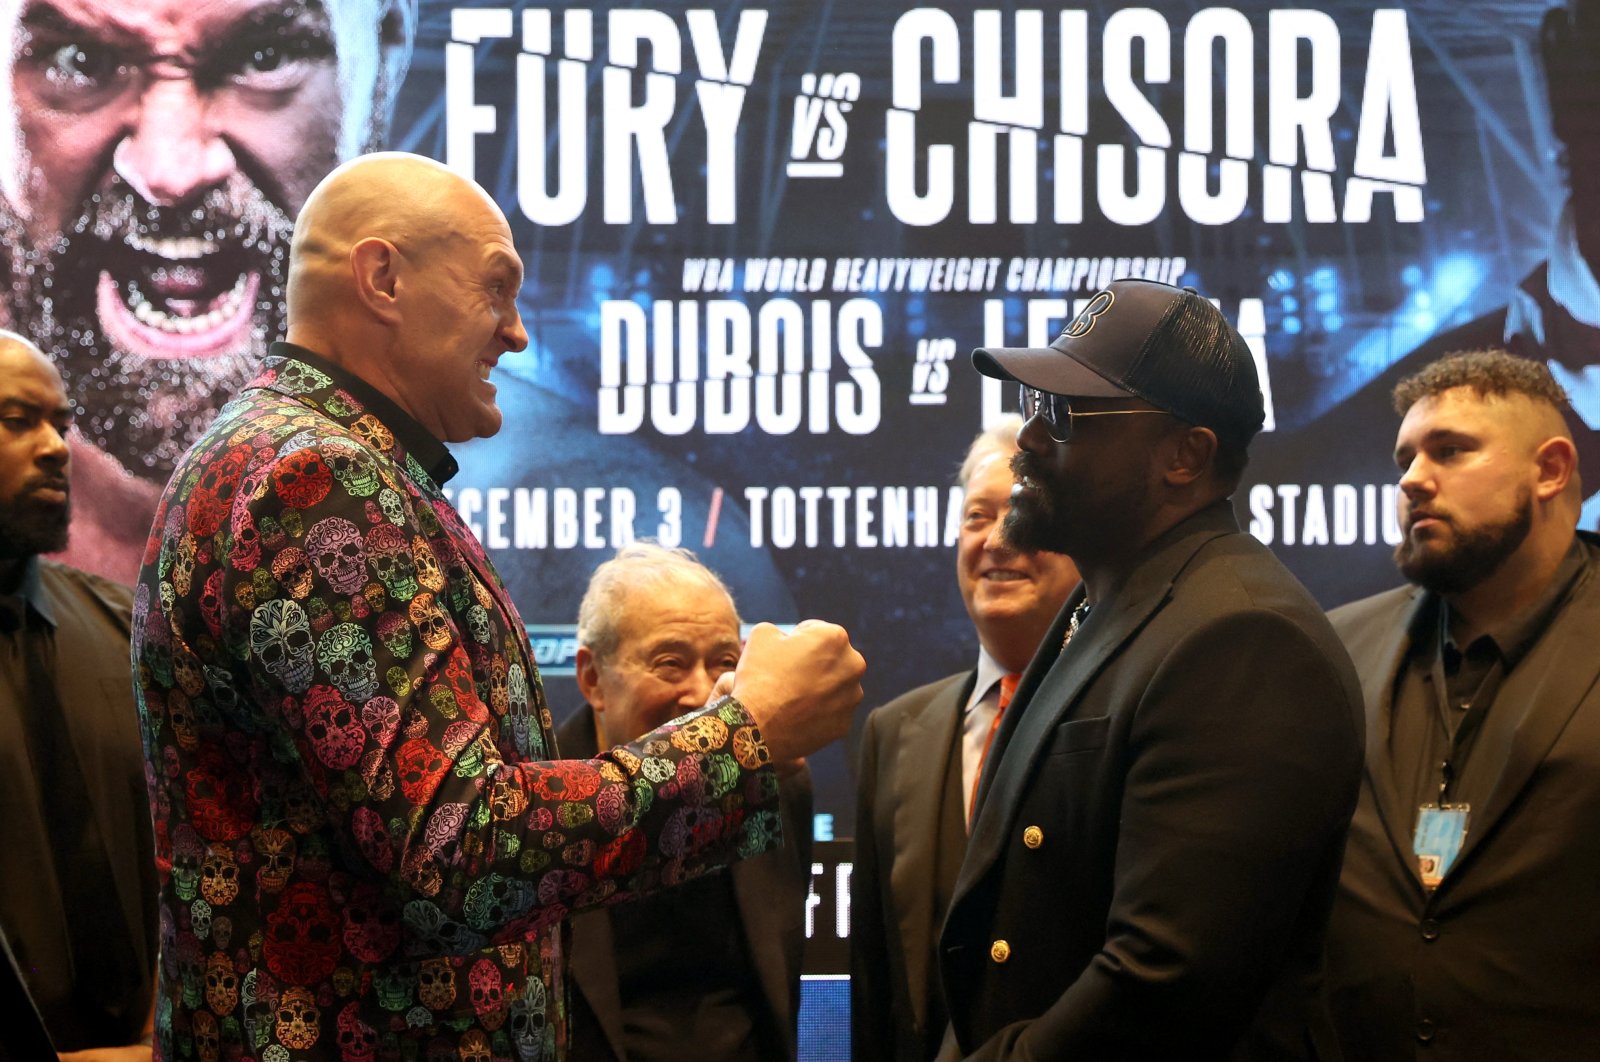 Tyson Fury and Derek Chisora pose after a press conference at Tottenham Hotspur Stadium, London, Britain, Oct. 20, 2022. (REUTERS Photo)